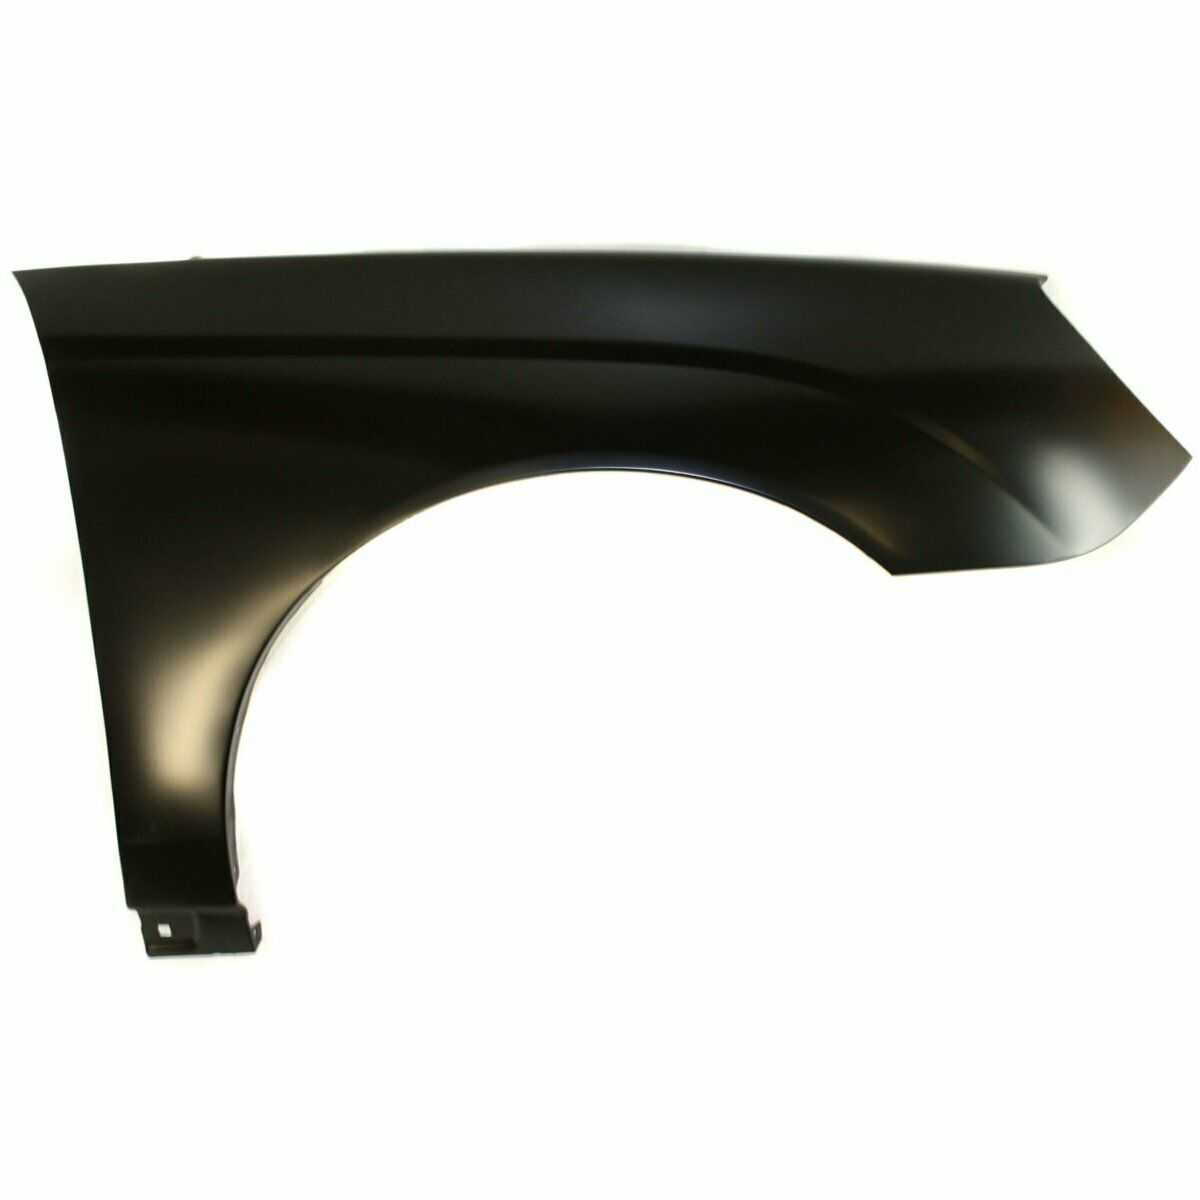 2004-2007 Chevy Malibu Right Fender Painted to Match